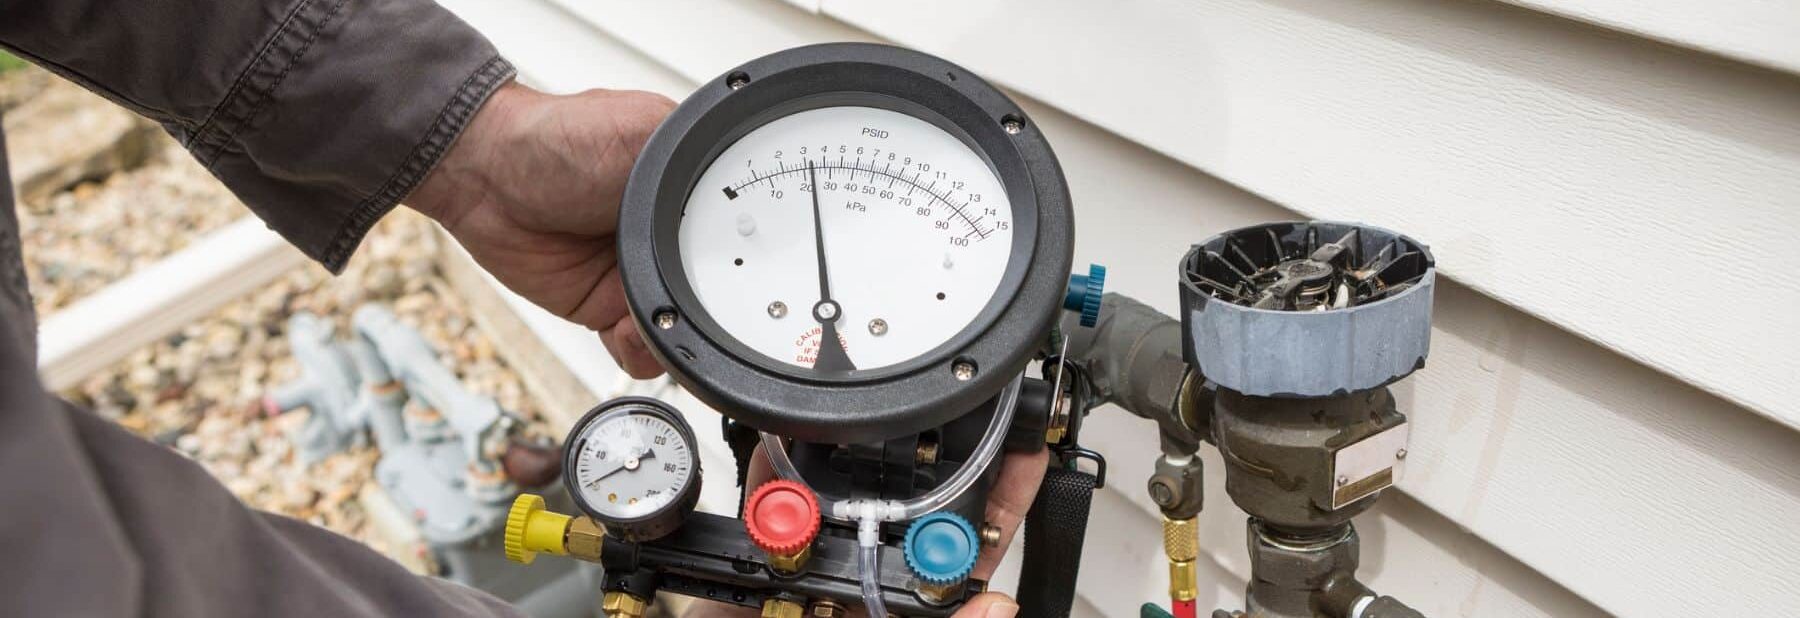 A technician's hand holding a pressure gauge device near an outdoor gas meter setup on the side of a house. The gauge shows the pressure reading and is connected to various hoses and fittings, indicating a gas line inspection or maintenance work. The background includes gravel and part of the house's exterior wall, suggesting an outdoor work environment